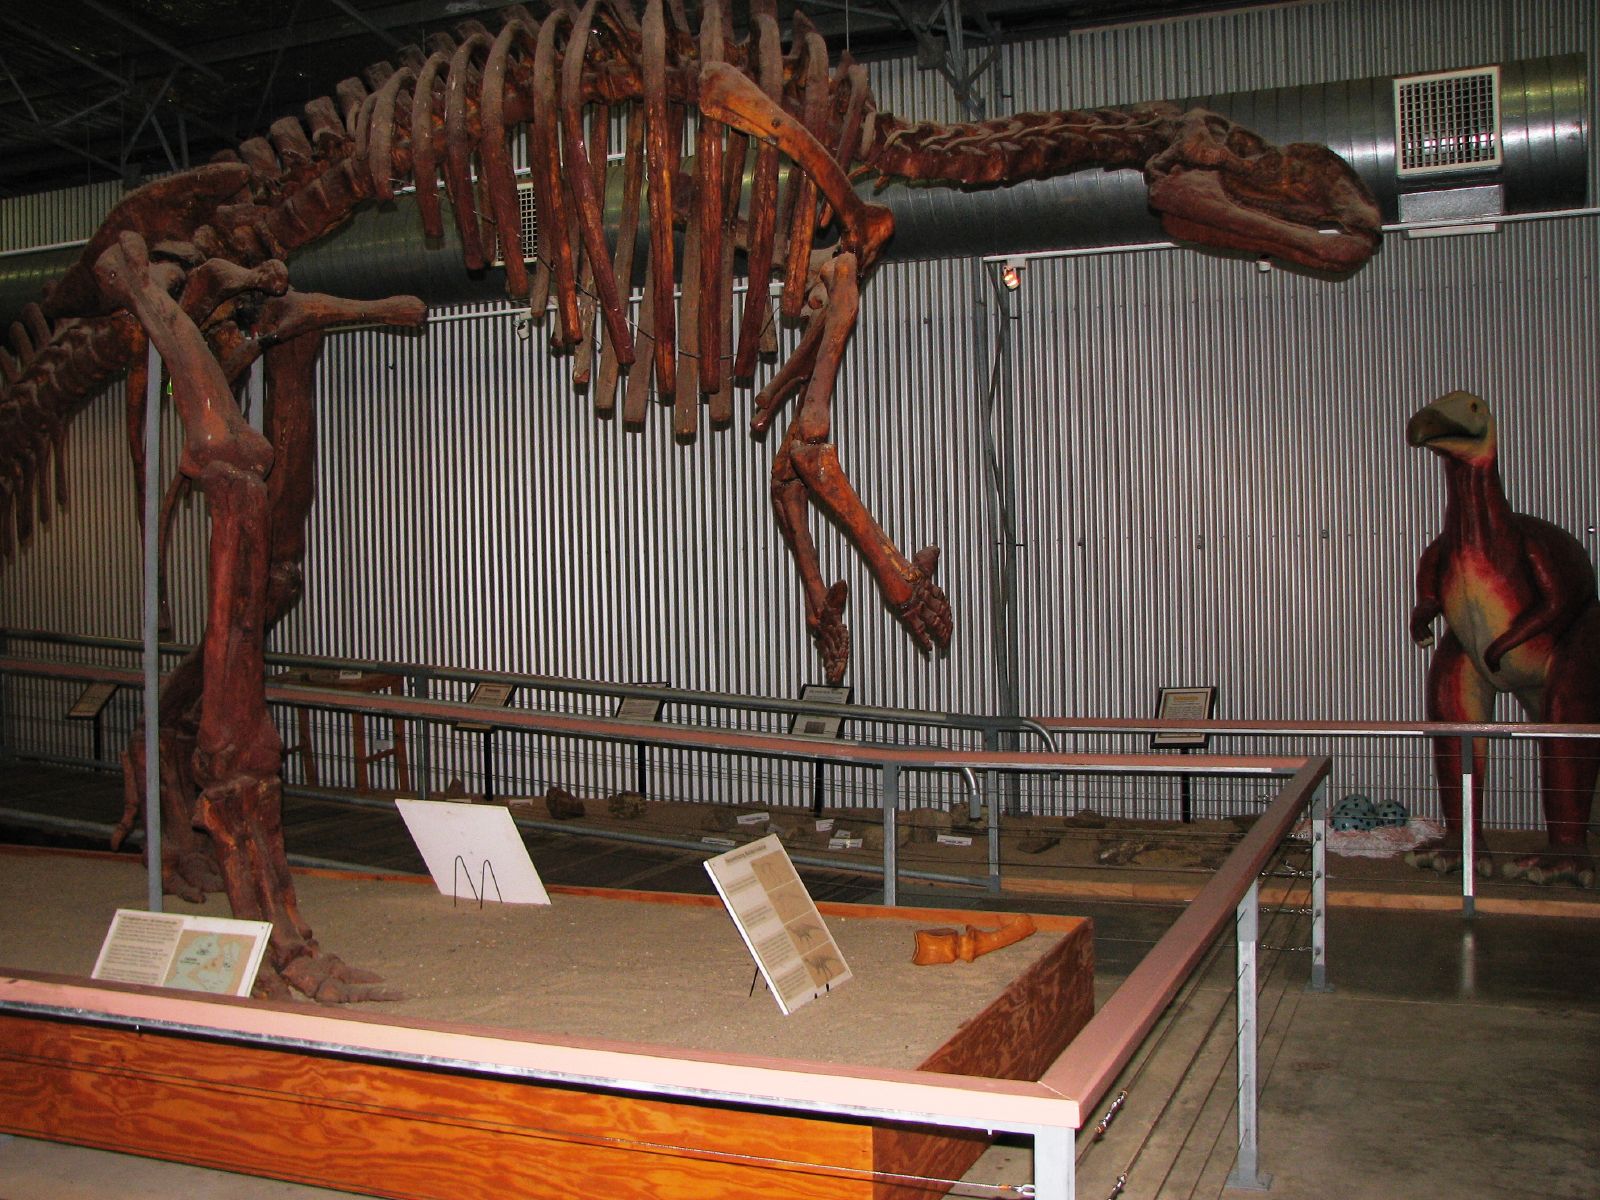 a museum of dinosaurs in a large building